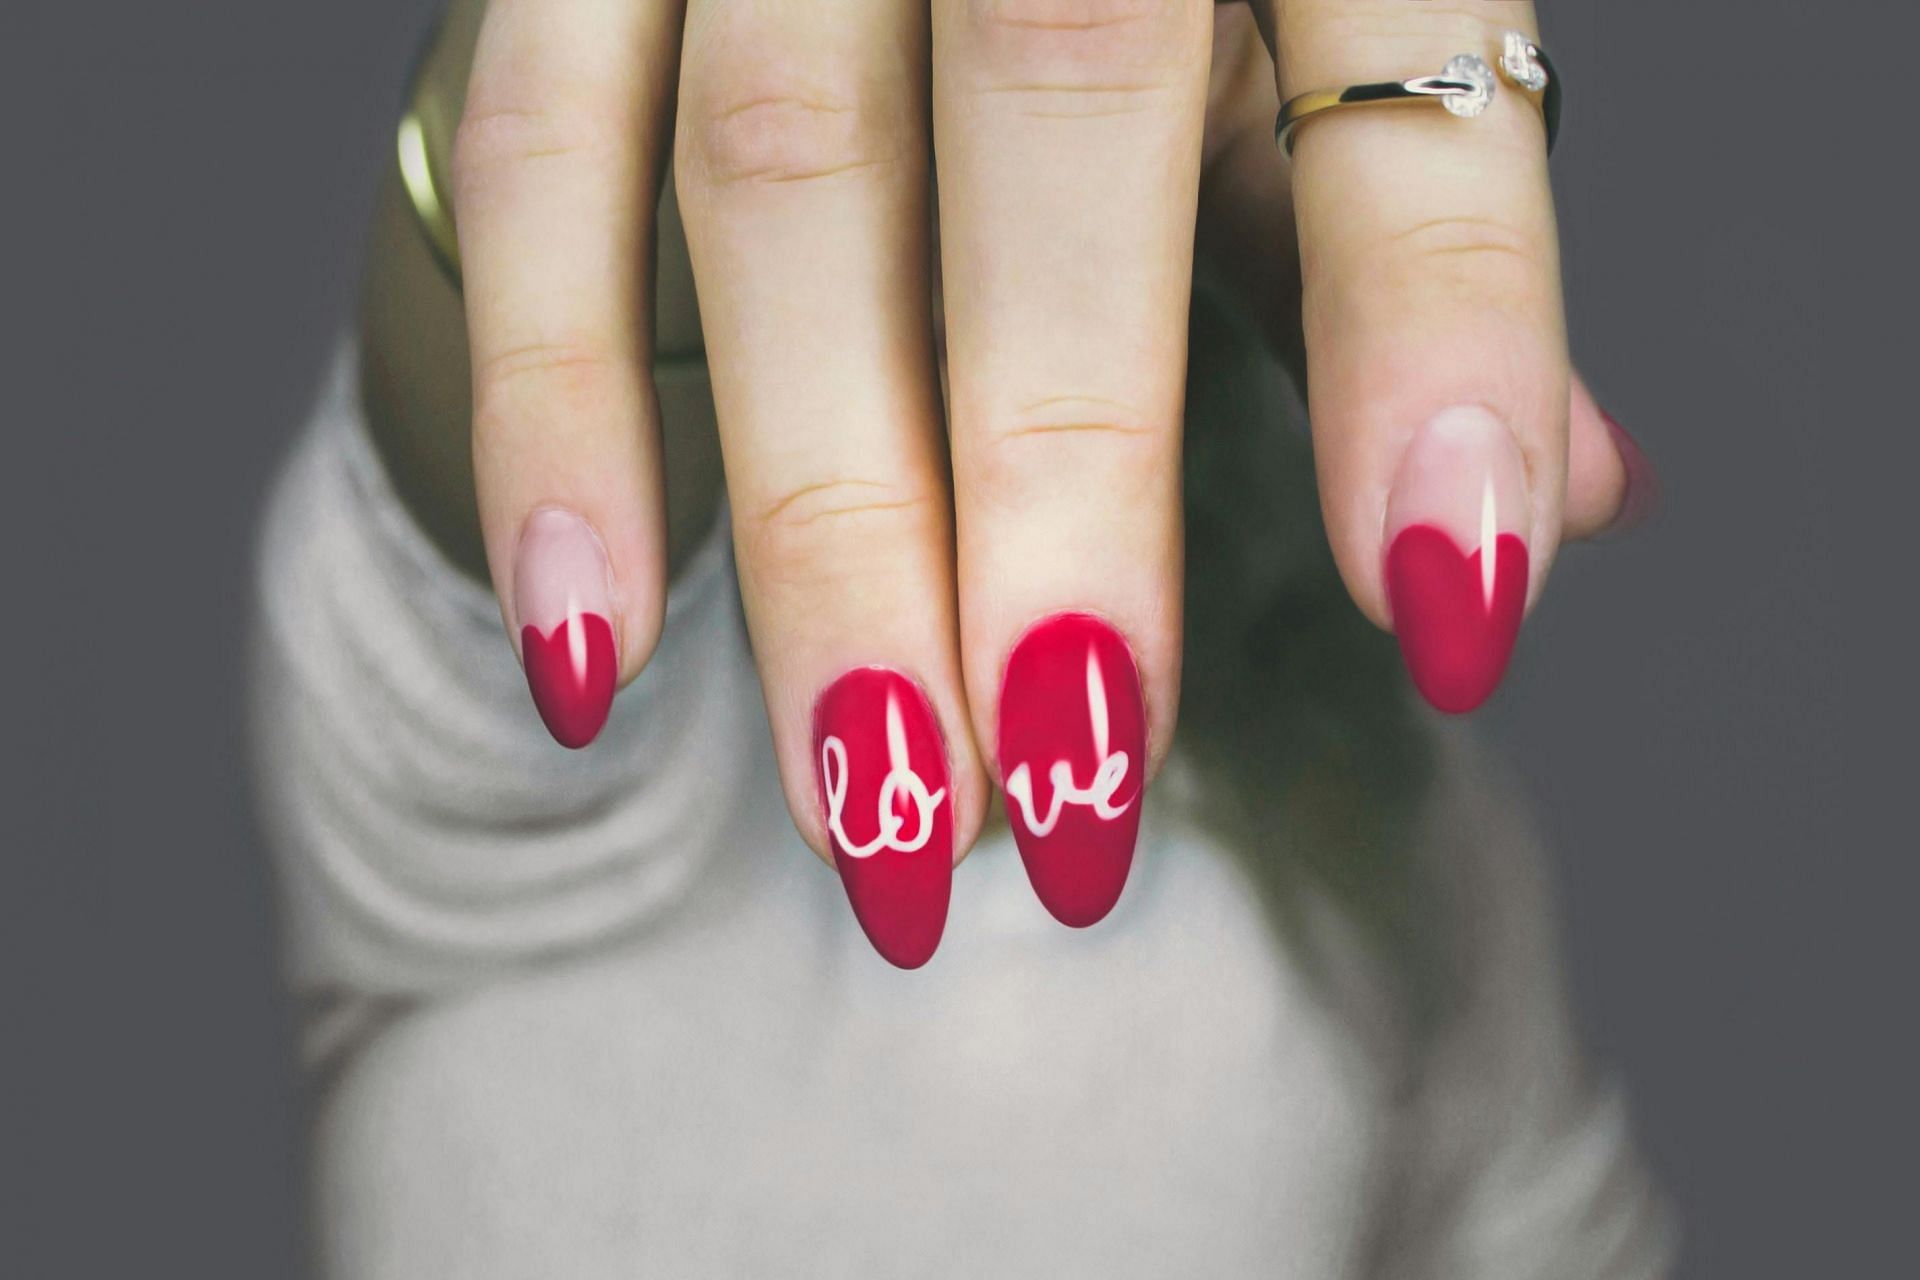 tips to stop picking nails (image sourced via Pexels / Photo by designecologist)